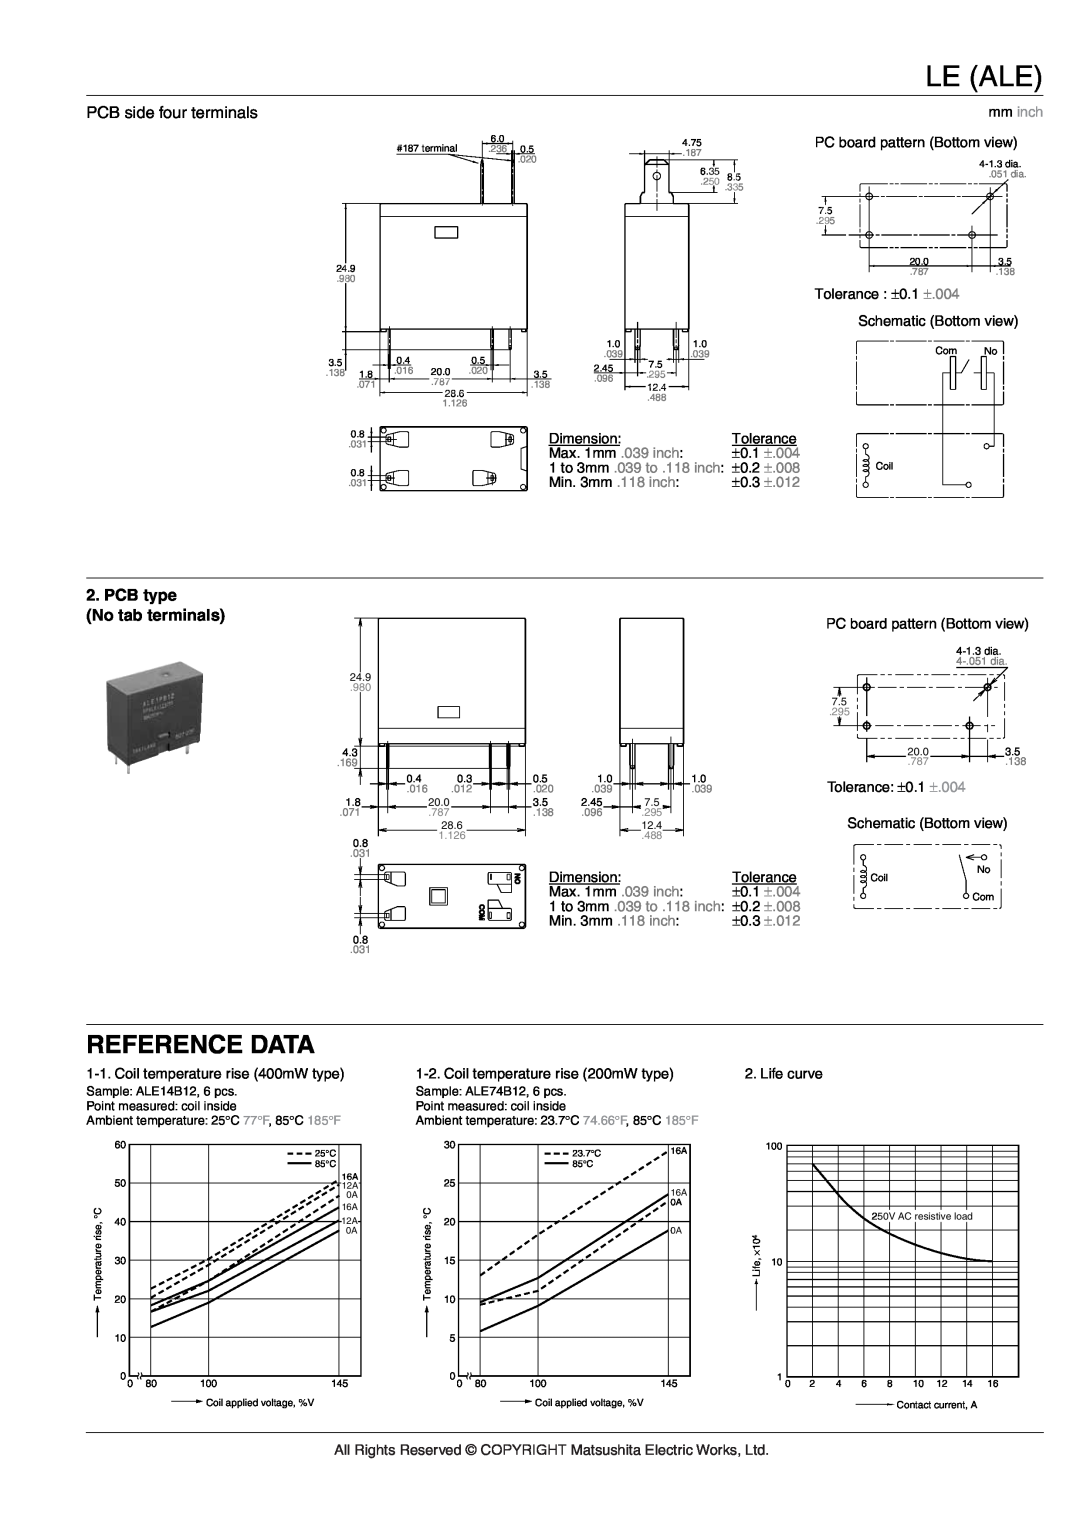 Panasonic LE Relays specifications Reference Data, Le Ale, mm inch, ±.004, 1 to 3mm .039 to .118 inch, ±.008, ±.012 